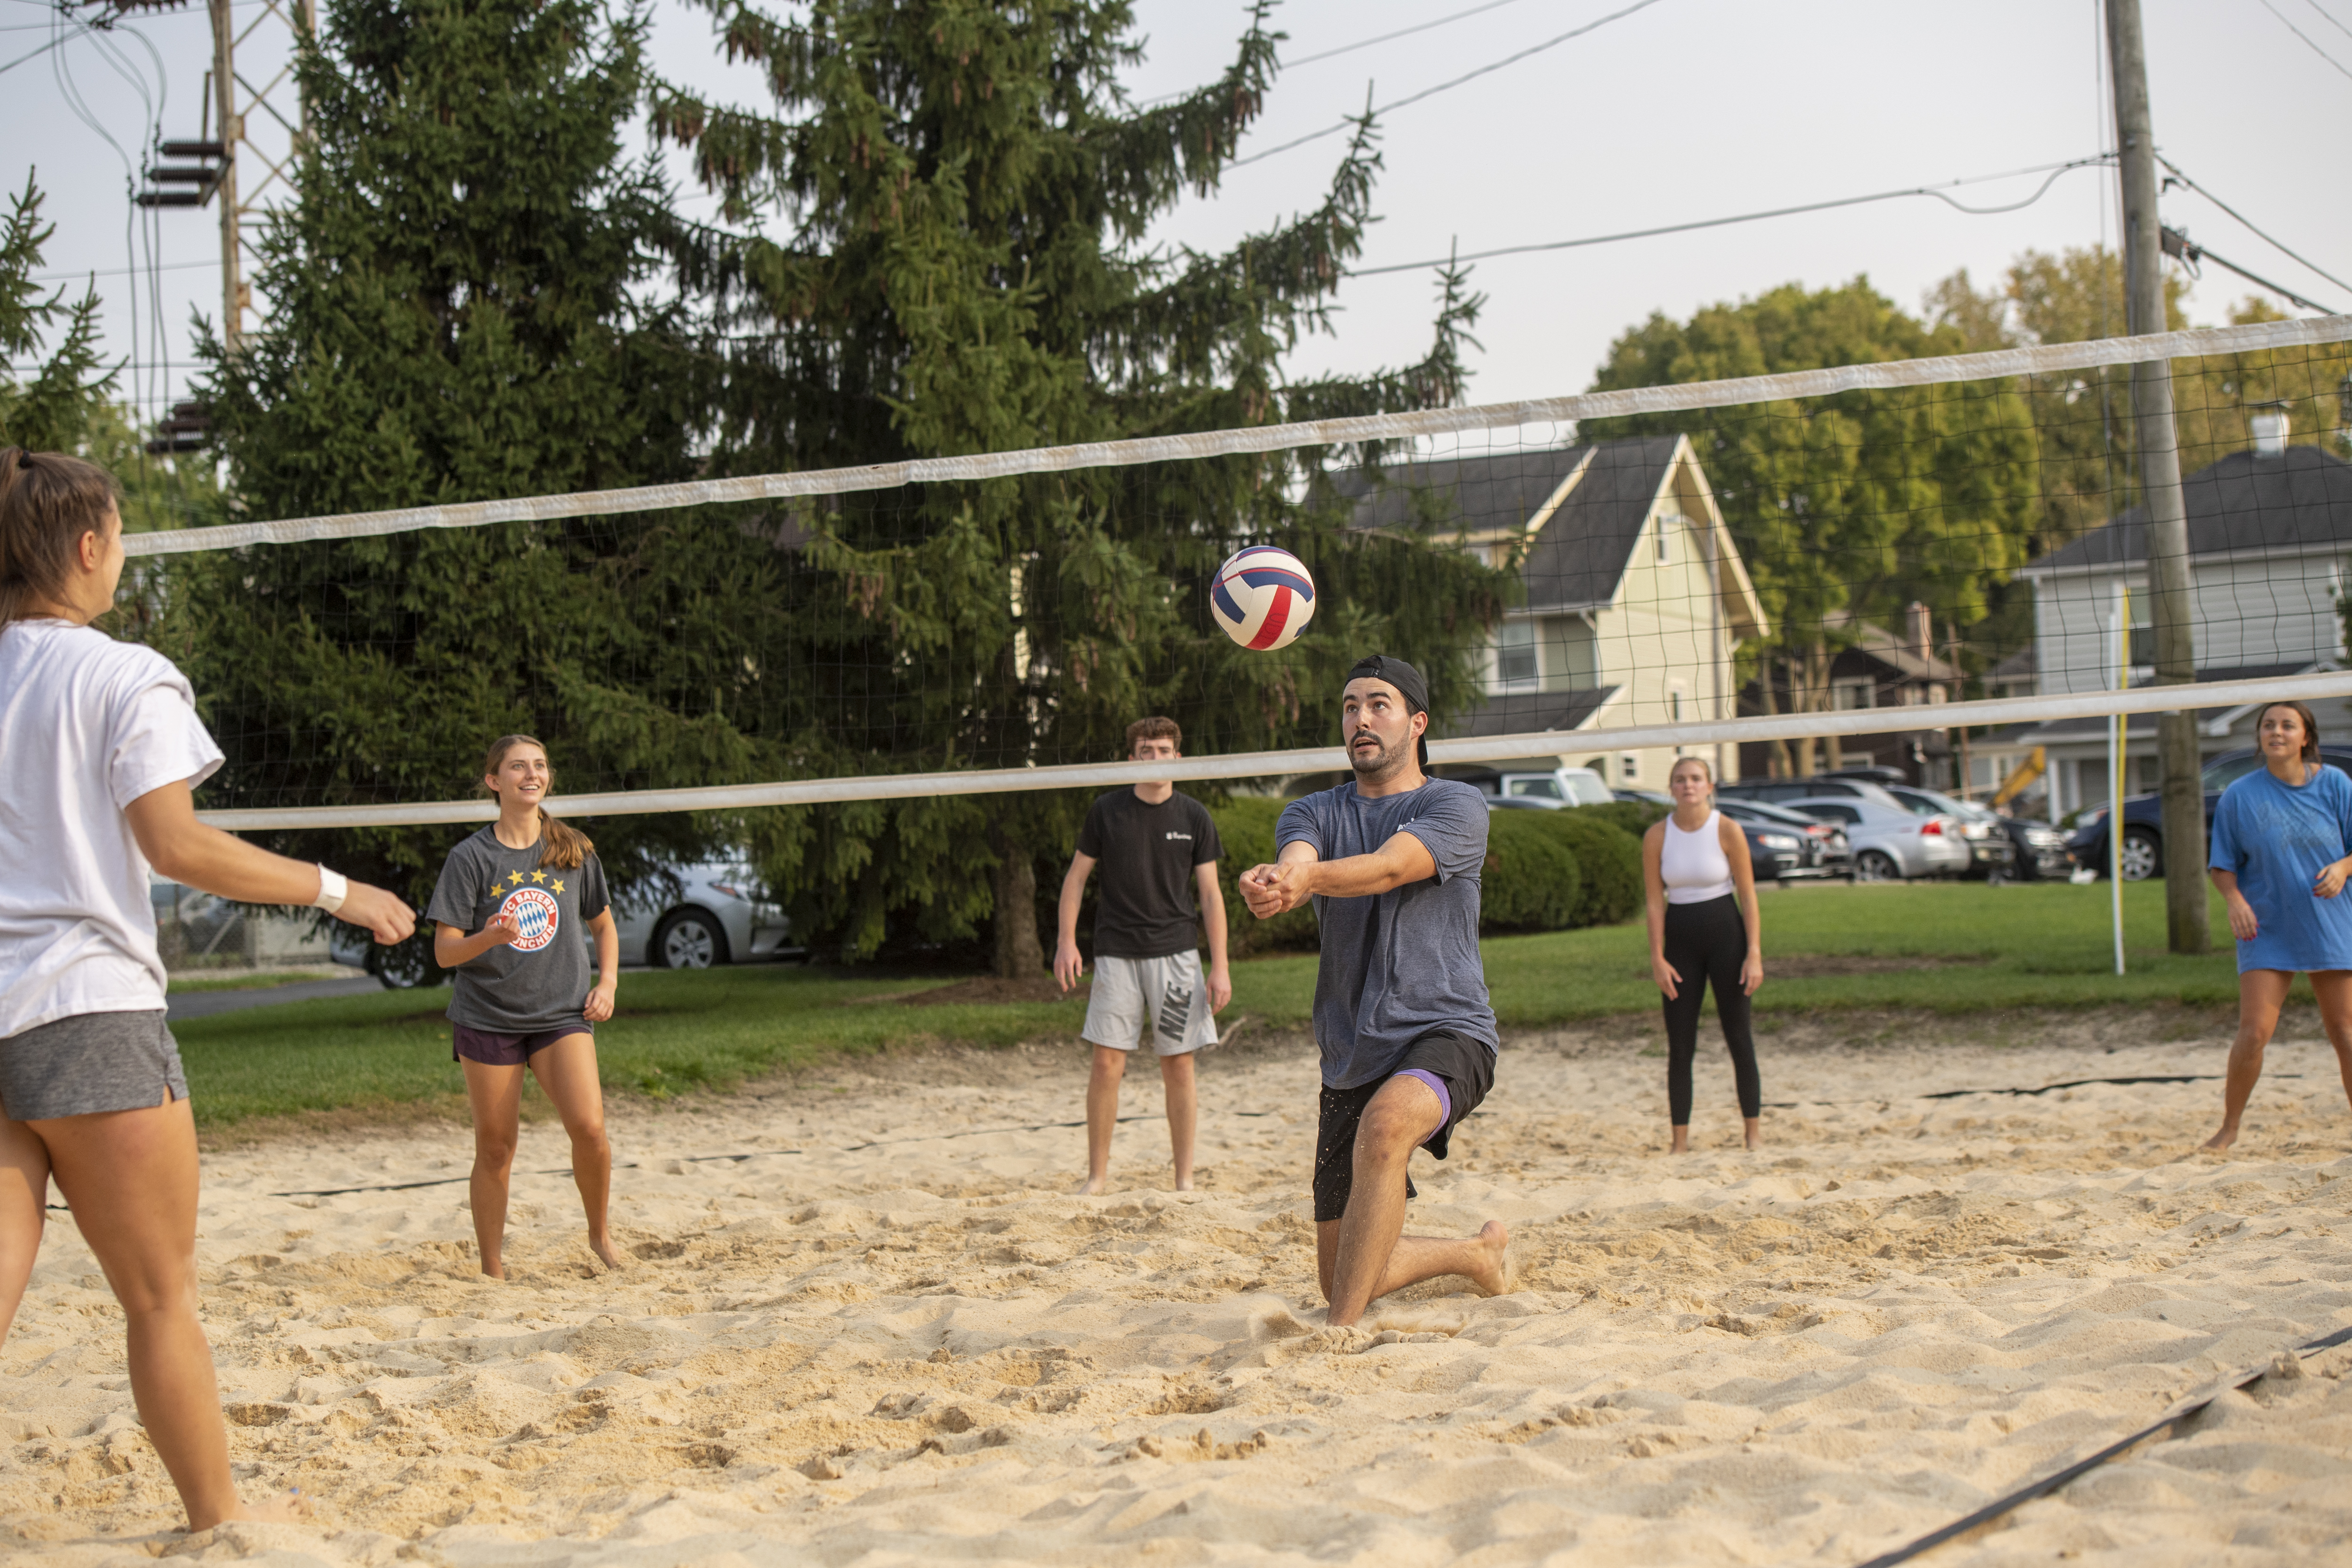 ${ Participant playing sand volleyball preparing to bump the ball up to their teammates. }